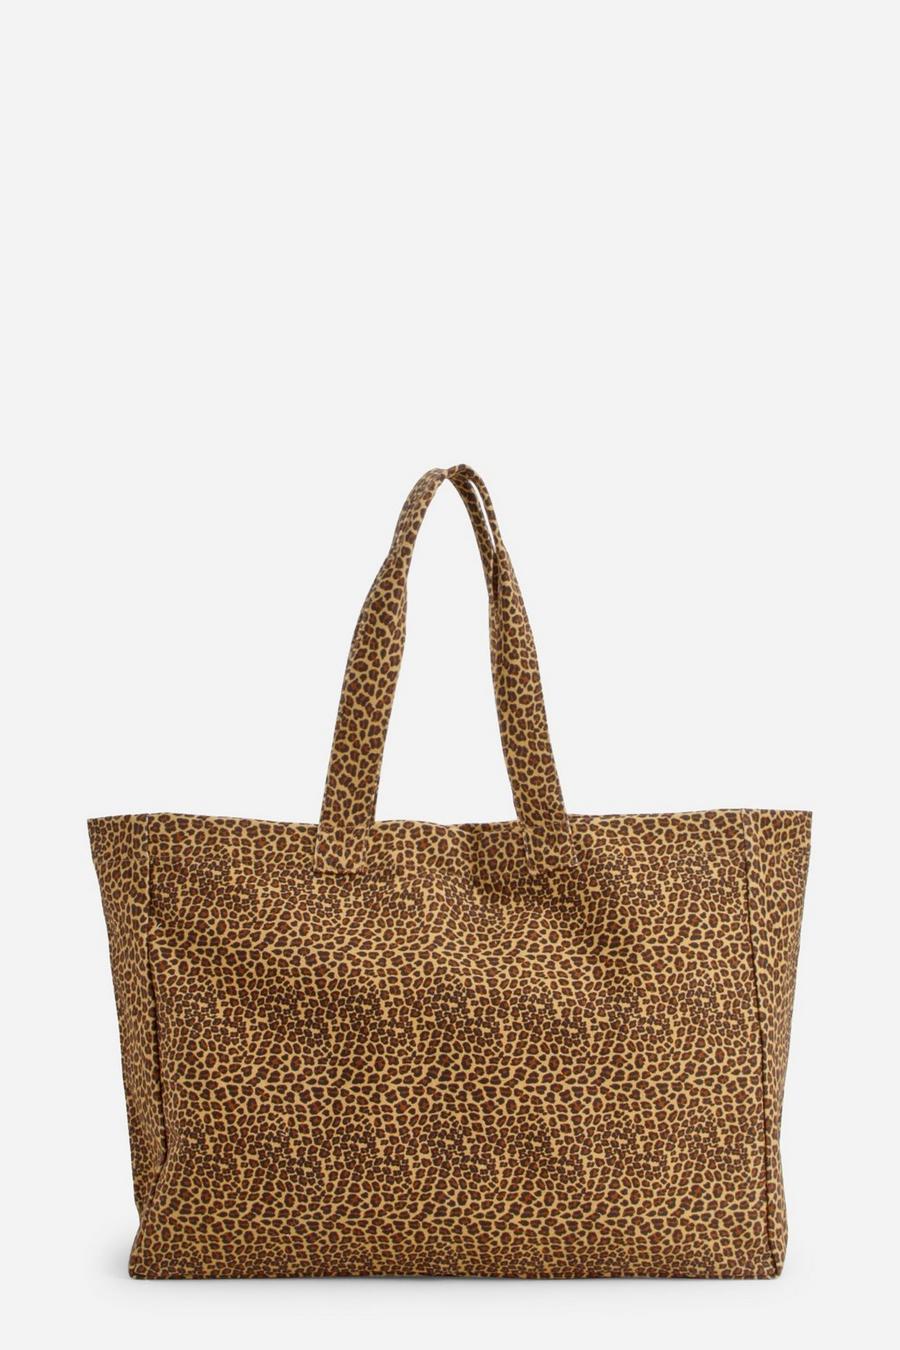 Leopard Print Oversized Canvas Tote Bag  